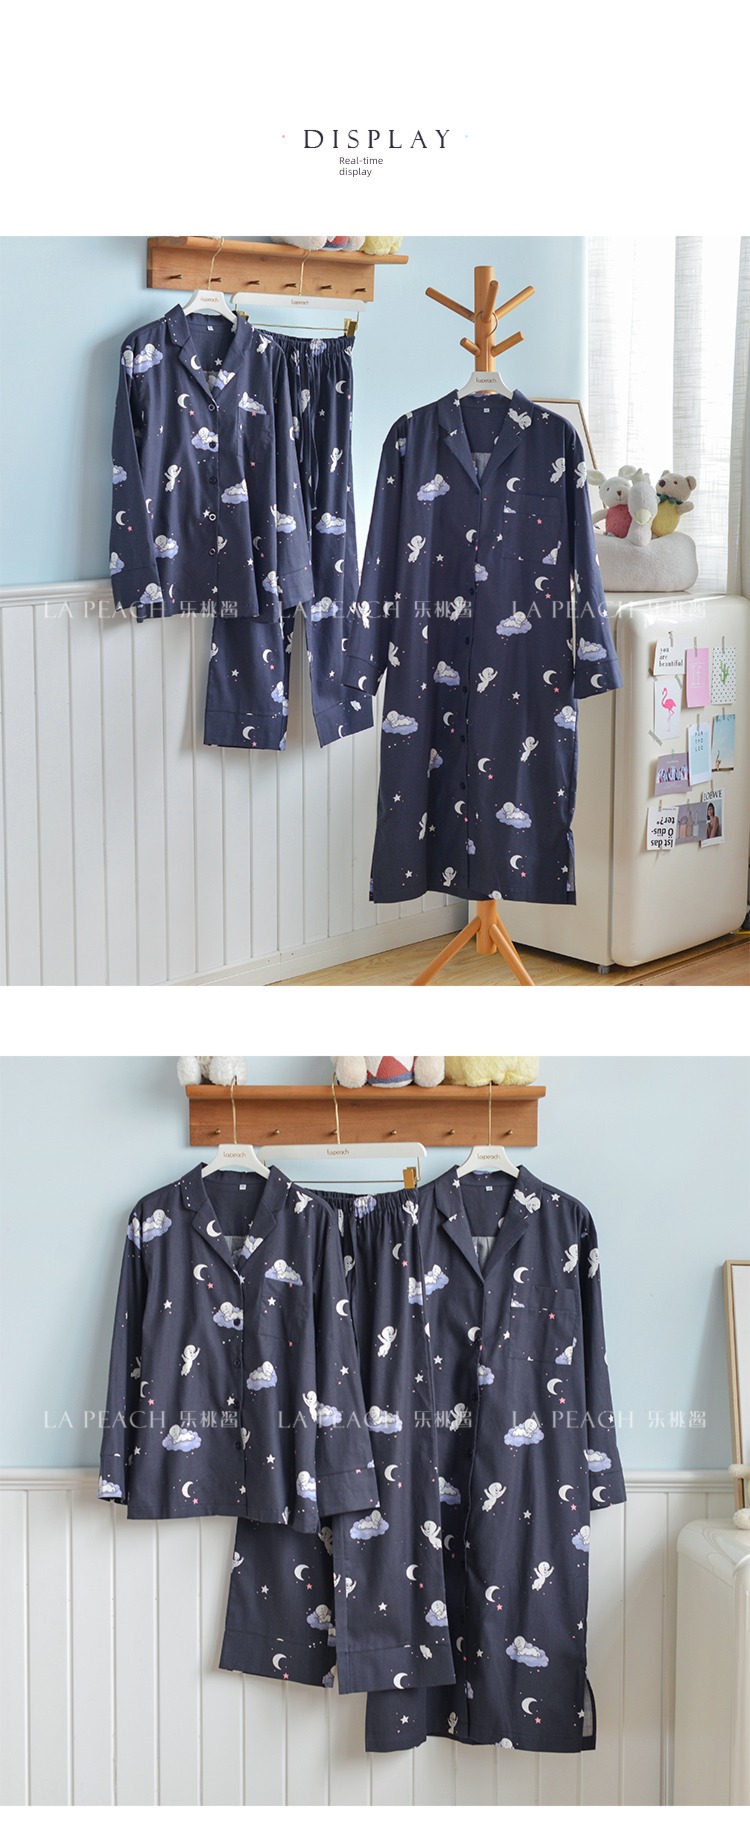 Le peach sauce the moon and the stars printing Nightdress cotton material female Cartoon